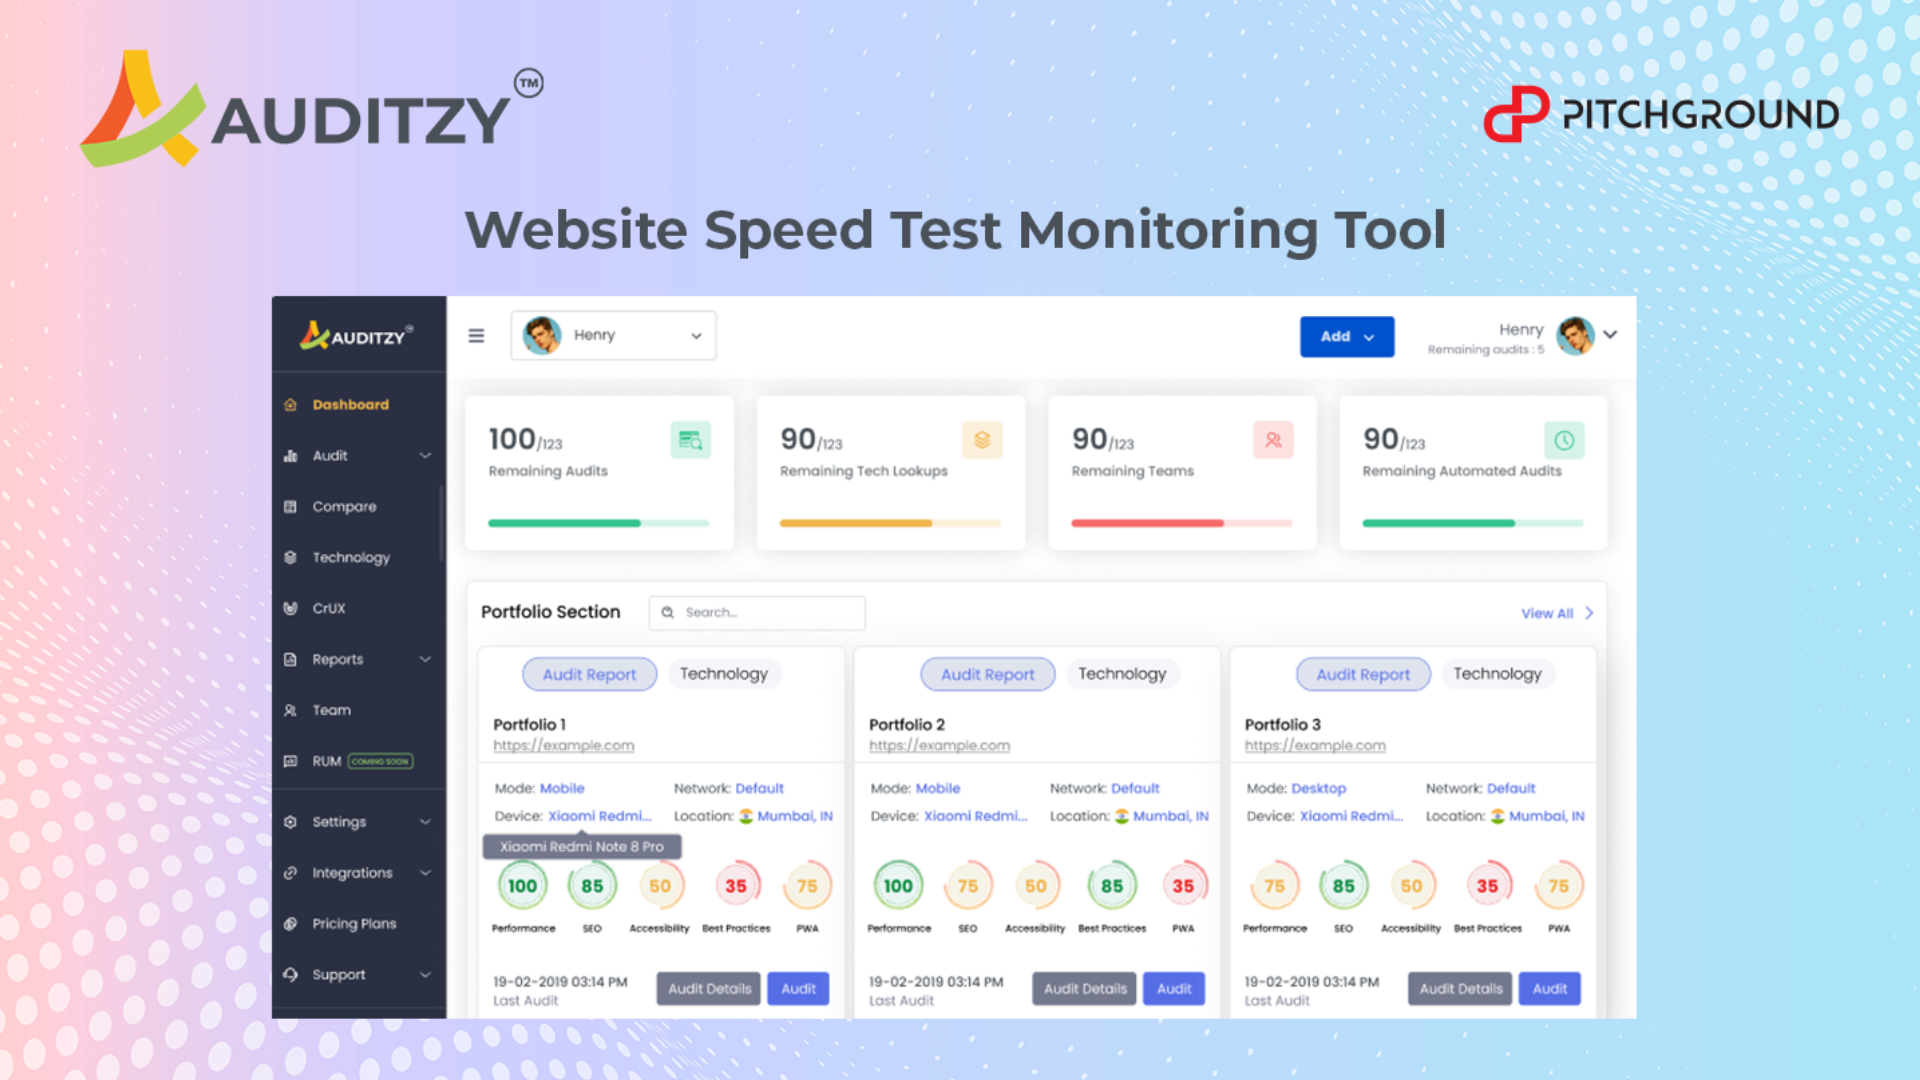 Lifetime Deal to Auditzy: Plan D (Pro) for $397